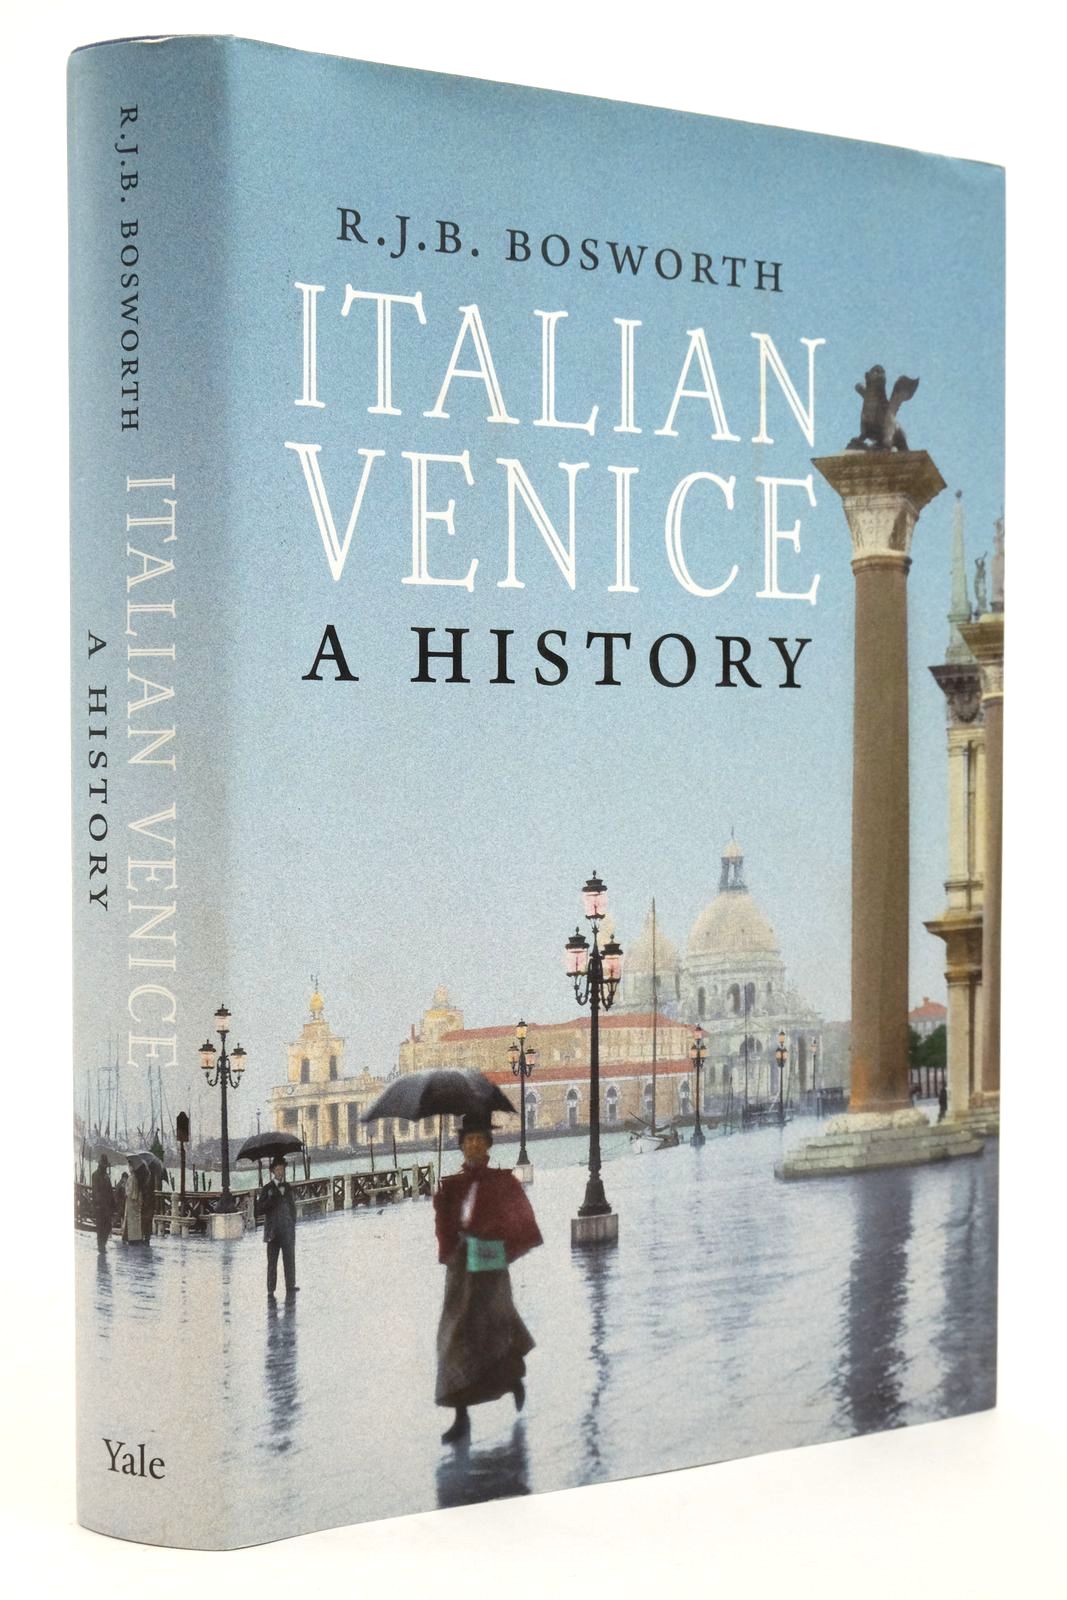 Photo of ITALIAN VENICE: A HISTORY written by Bosworth, R.J.B. published by Yale University Press (STOCK CODE: 2138831)  for sale by Stella & Rose's Books